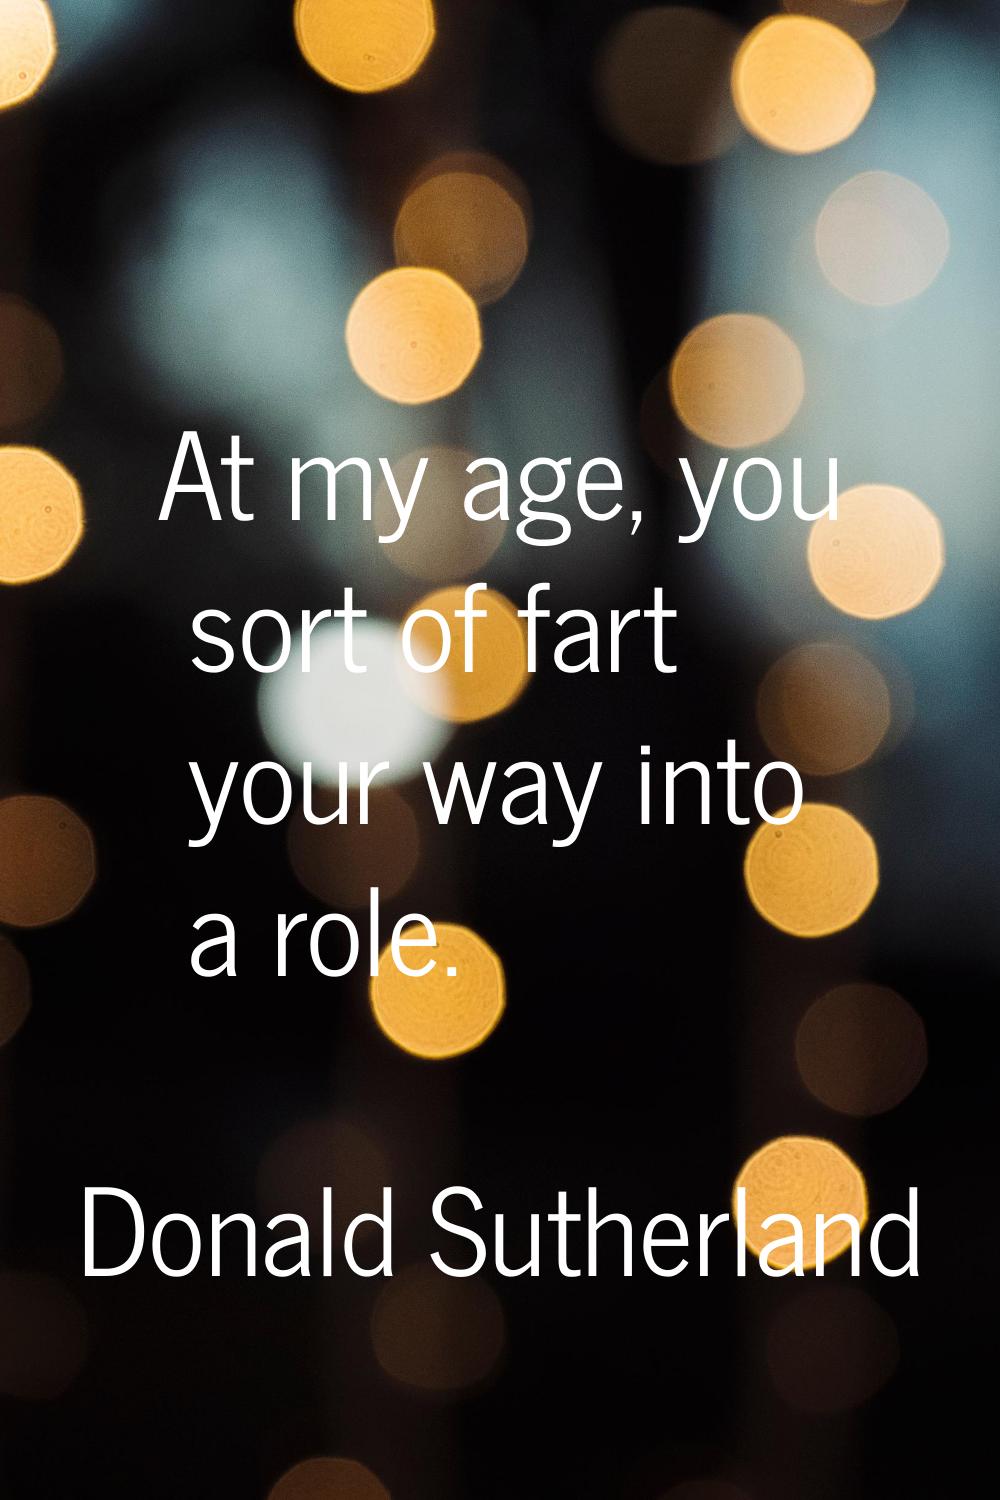 At my age, you sort of fart your way into a role.